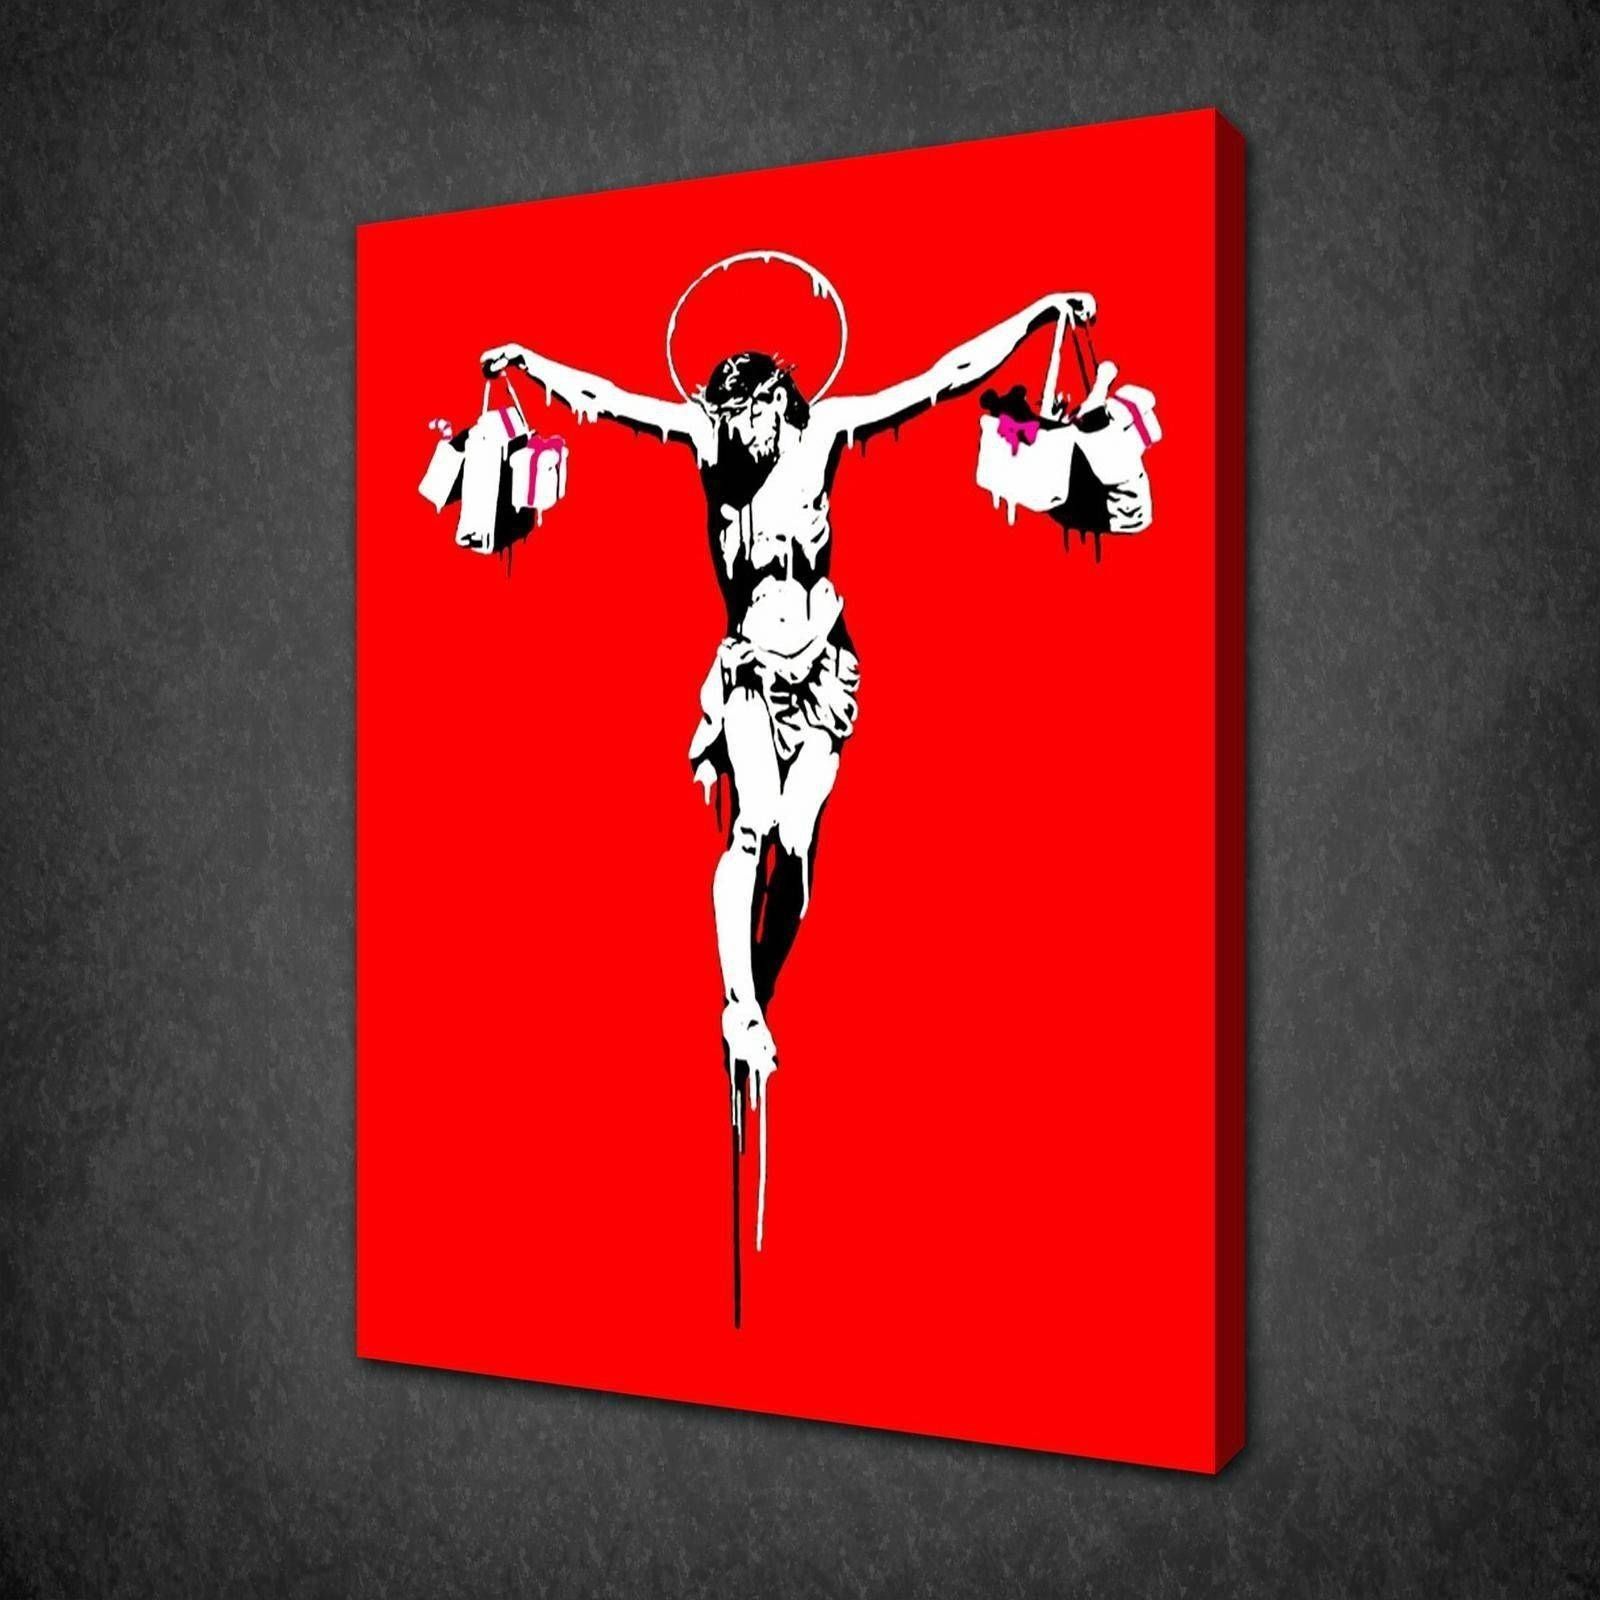 30"x20" Chunky Frames Archives – Canvas Print Art Inside Newest Banksy Wall Art Canvas (View 20 of 20)